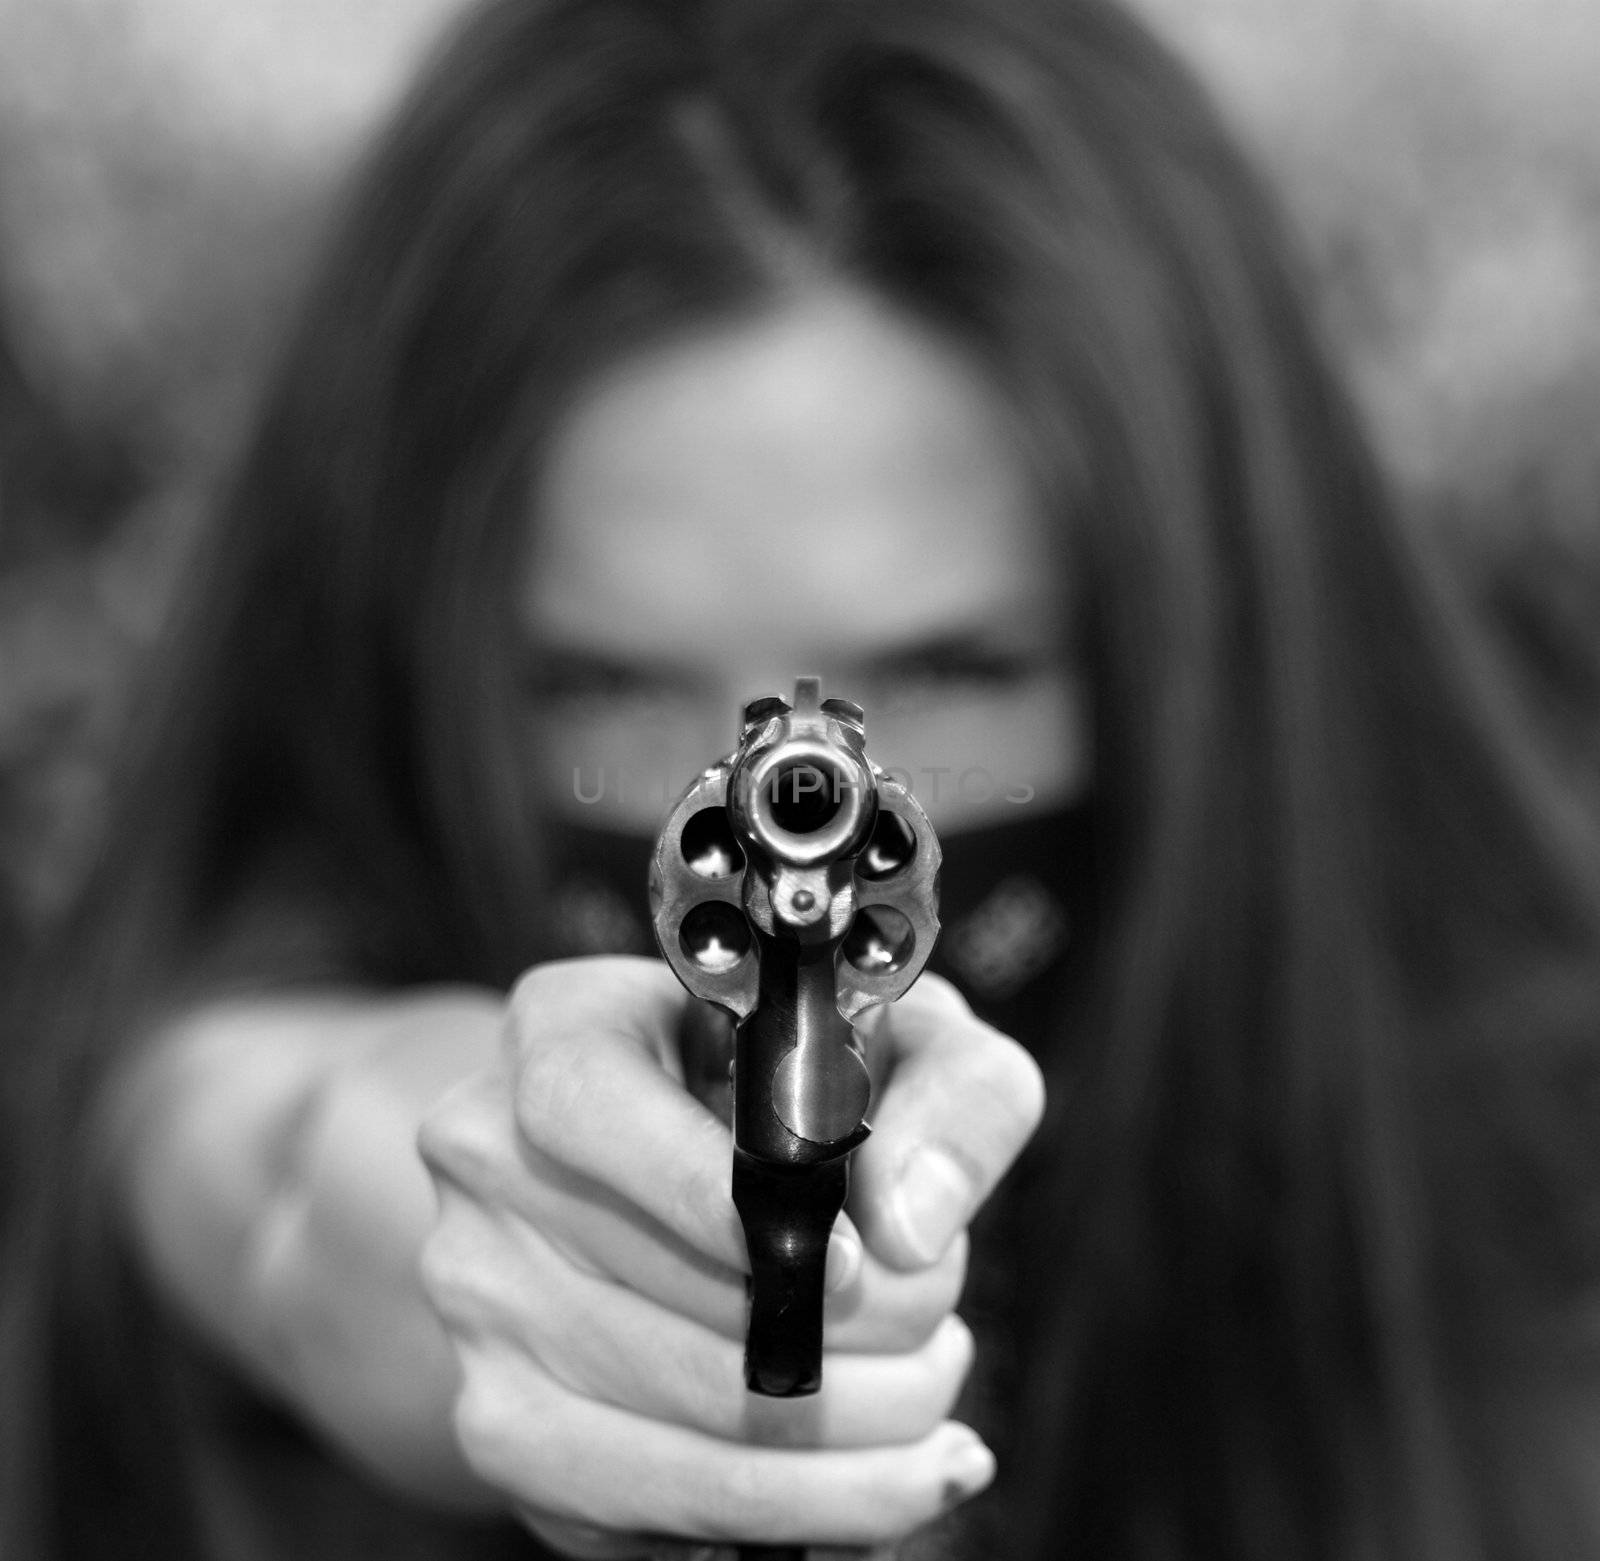 Girl with a revolver pointed at the viewer